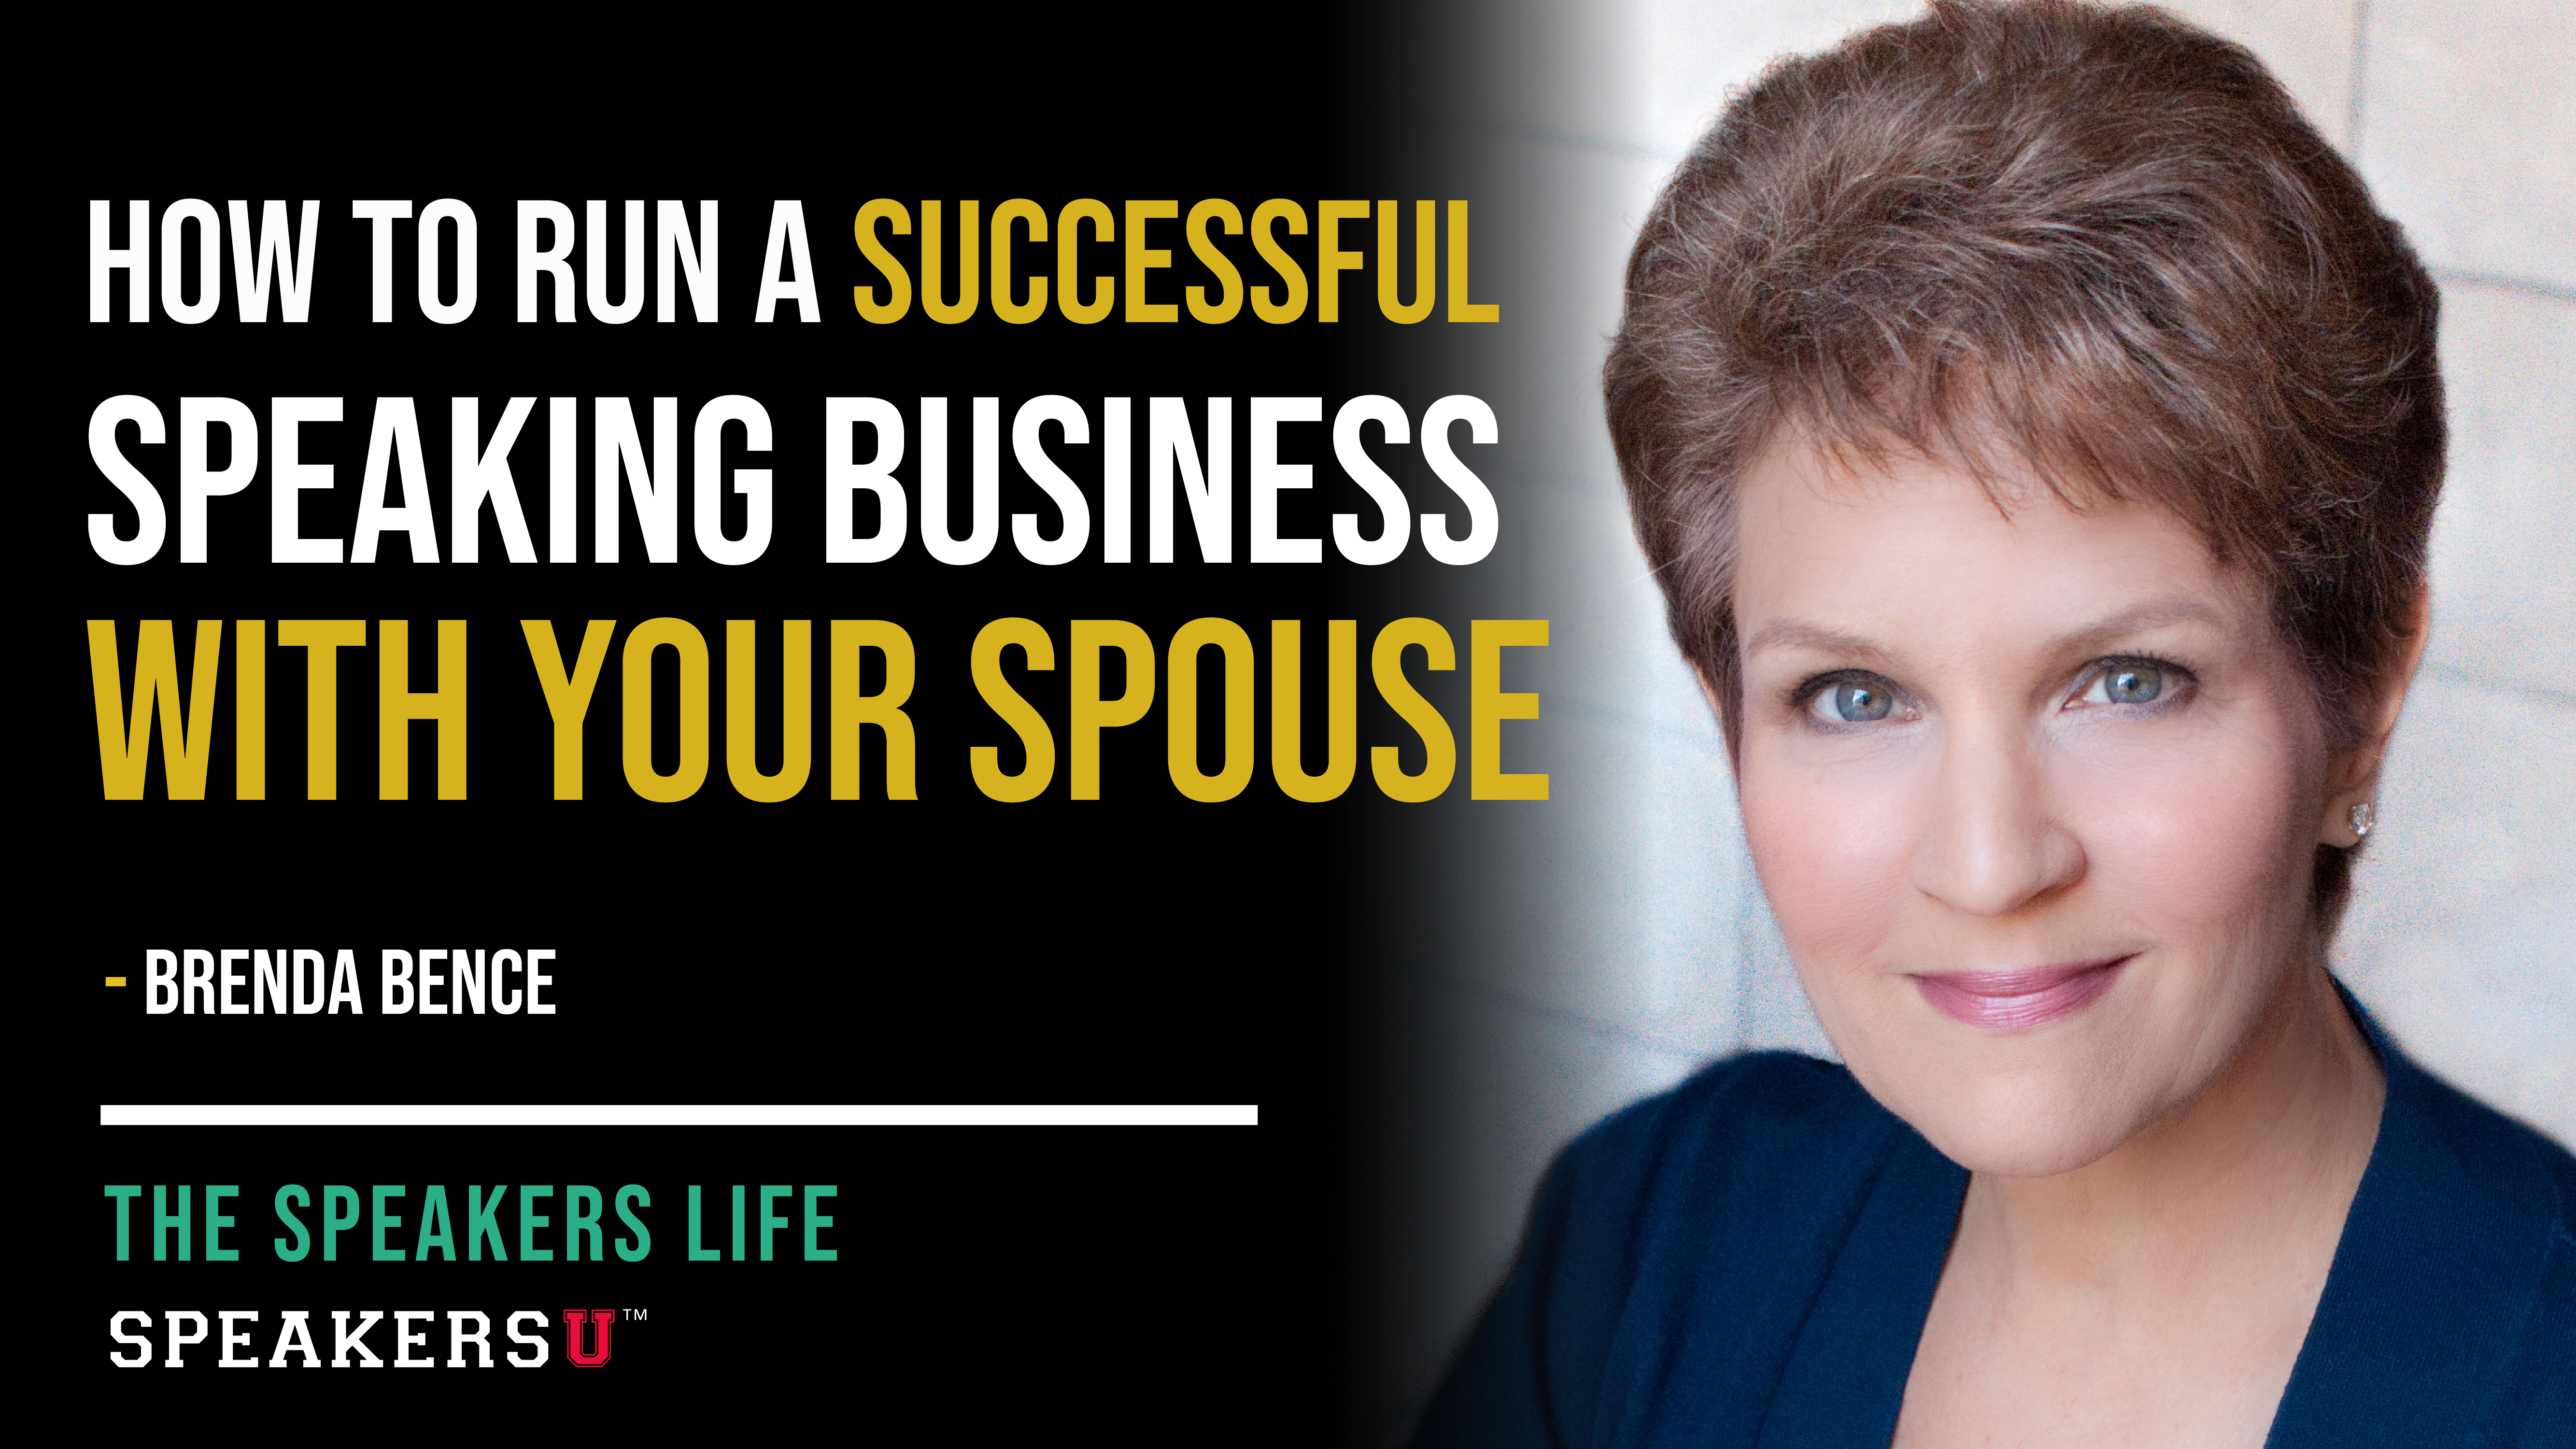 How To Run A Successful Speaking Business With Your Spouse